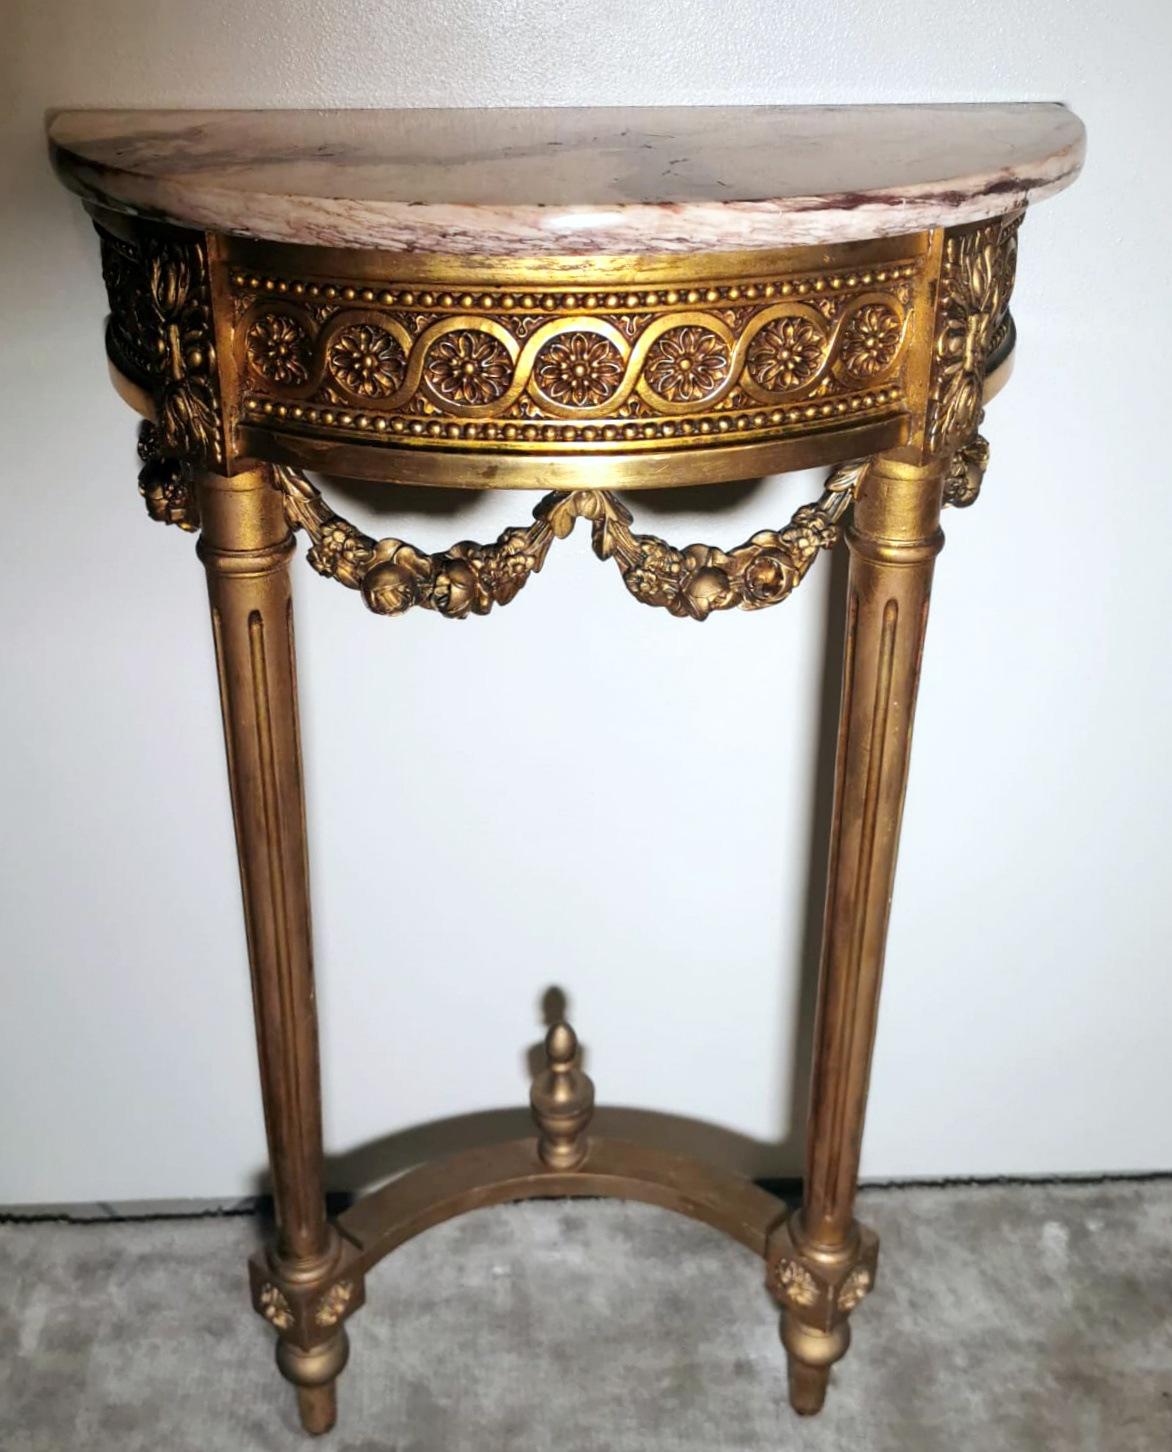 We kindly suggest you read the whole description, because with it we try to give you detailed technical and historical information to guarantee the authenticity of our objects.
Elegant and refined French console table in Louis XVI style in gilded